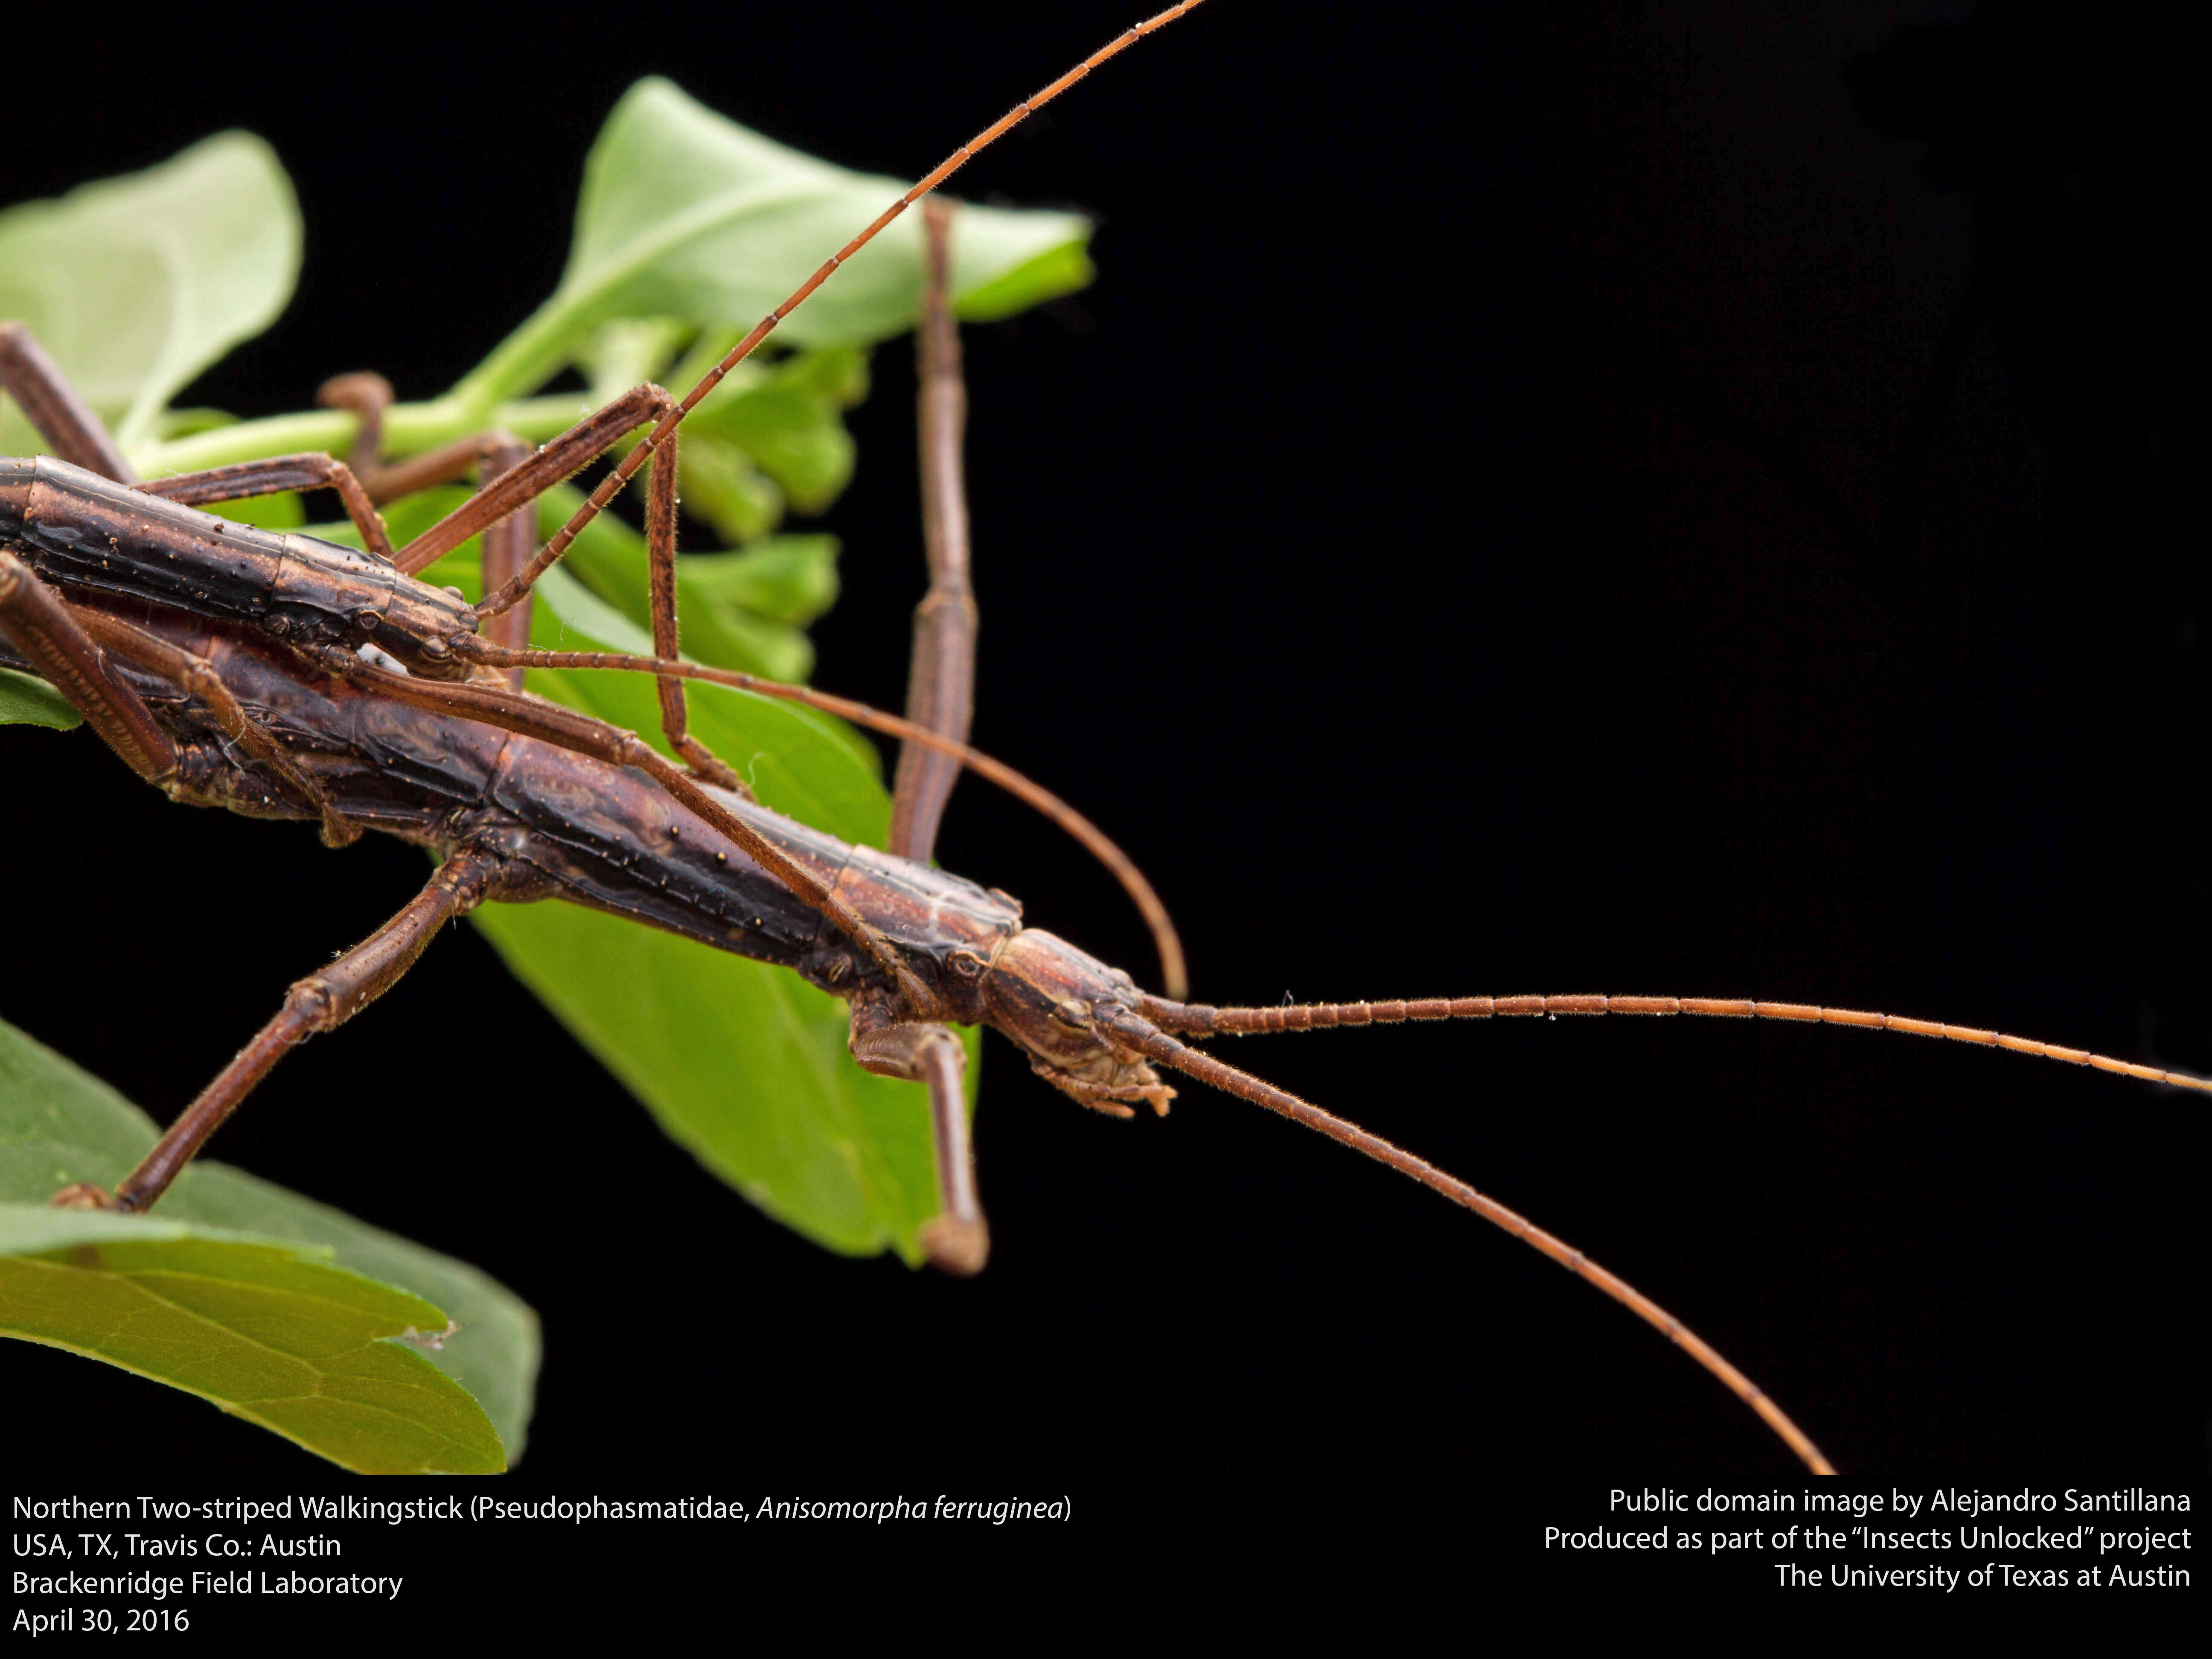 Image of Northern Two-striped Walkingstick